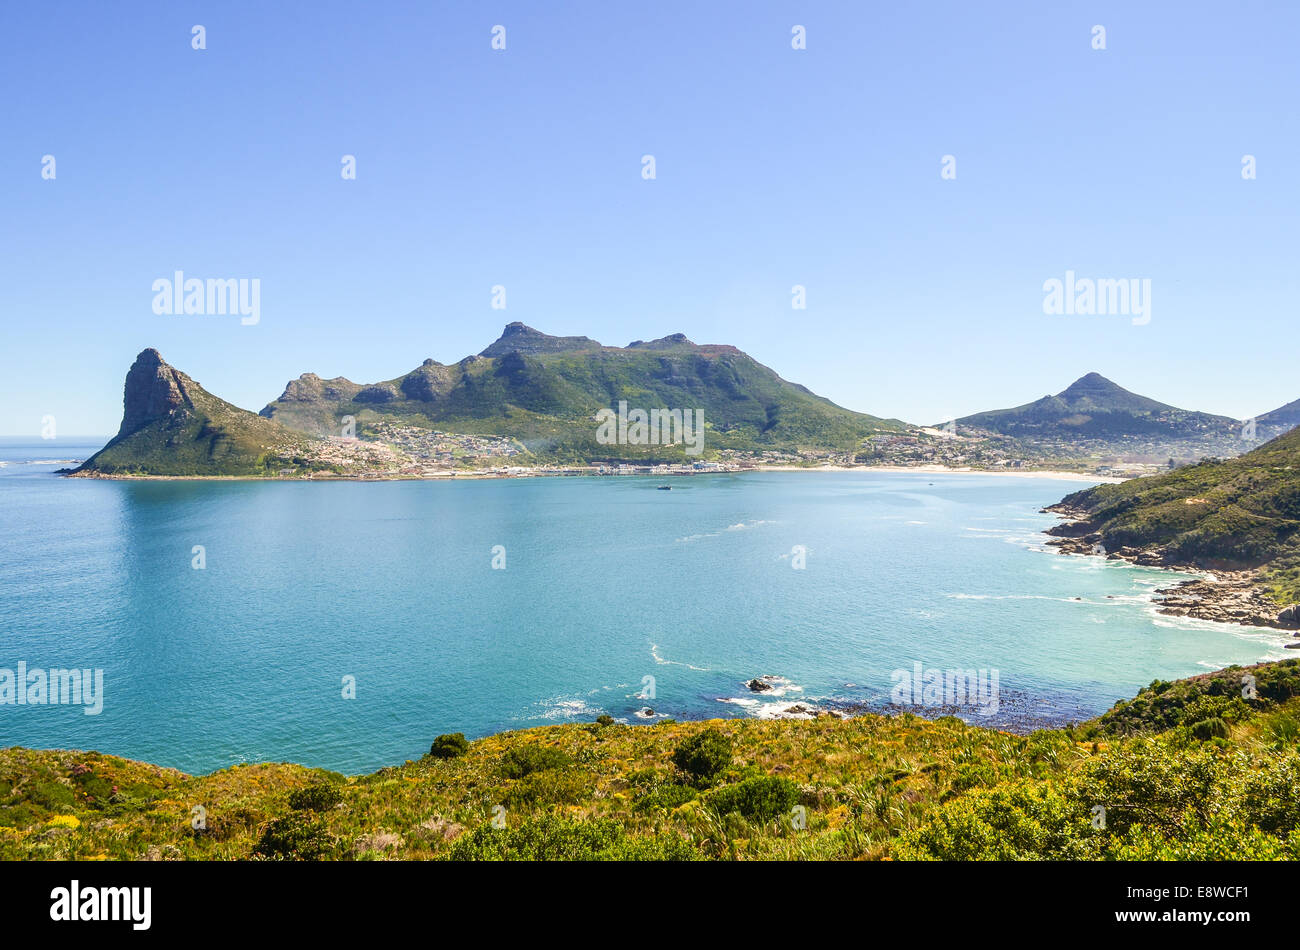 Dramatic landscape in Hout Bay, Cape Town peninsula, South Africa Stock Photo